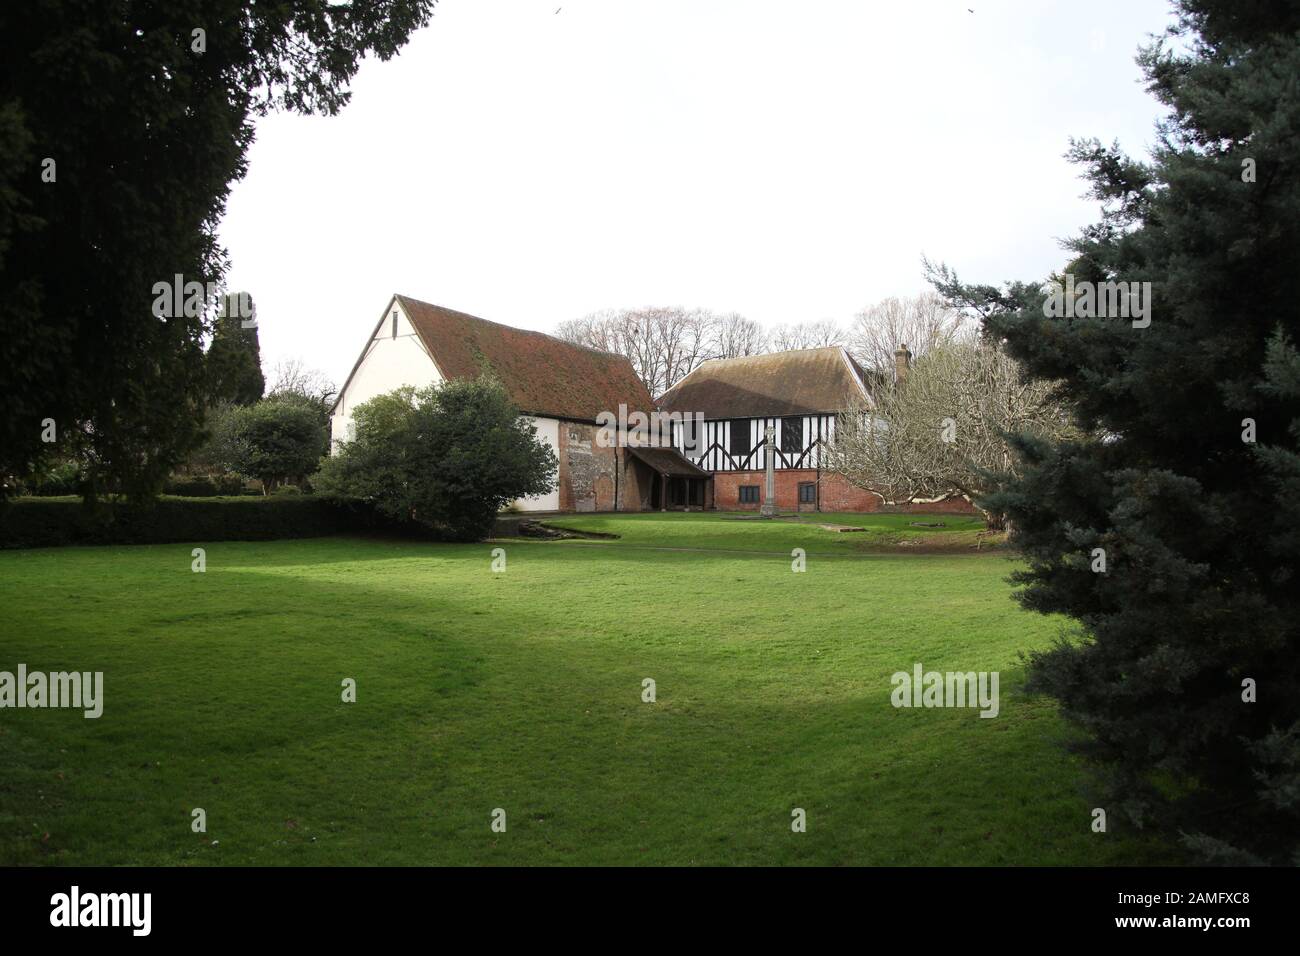 View of Prittlewell Priory from across the lawn, Southend on Sea, Essex, UK, January 2020 Stock Photo